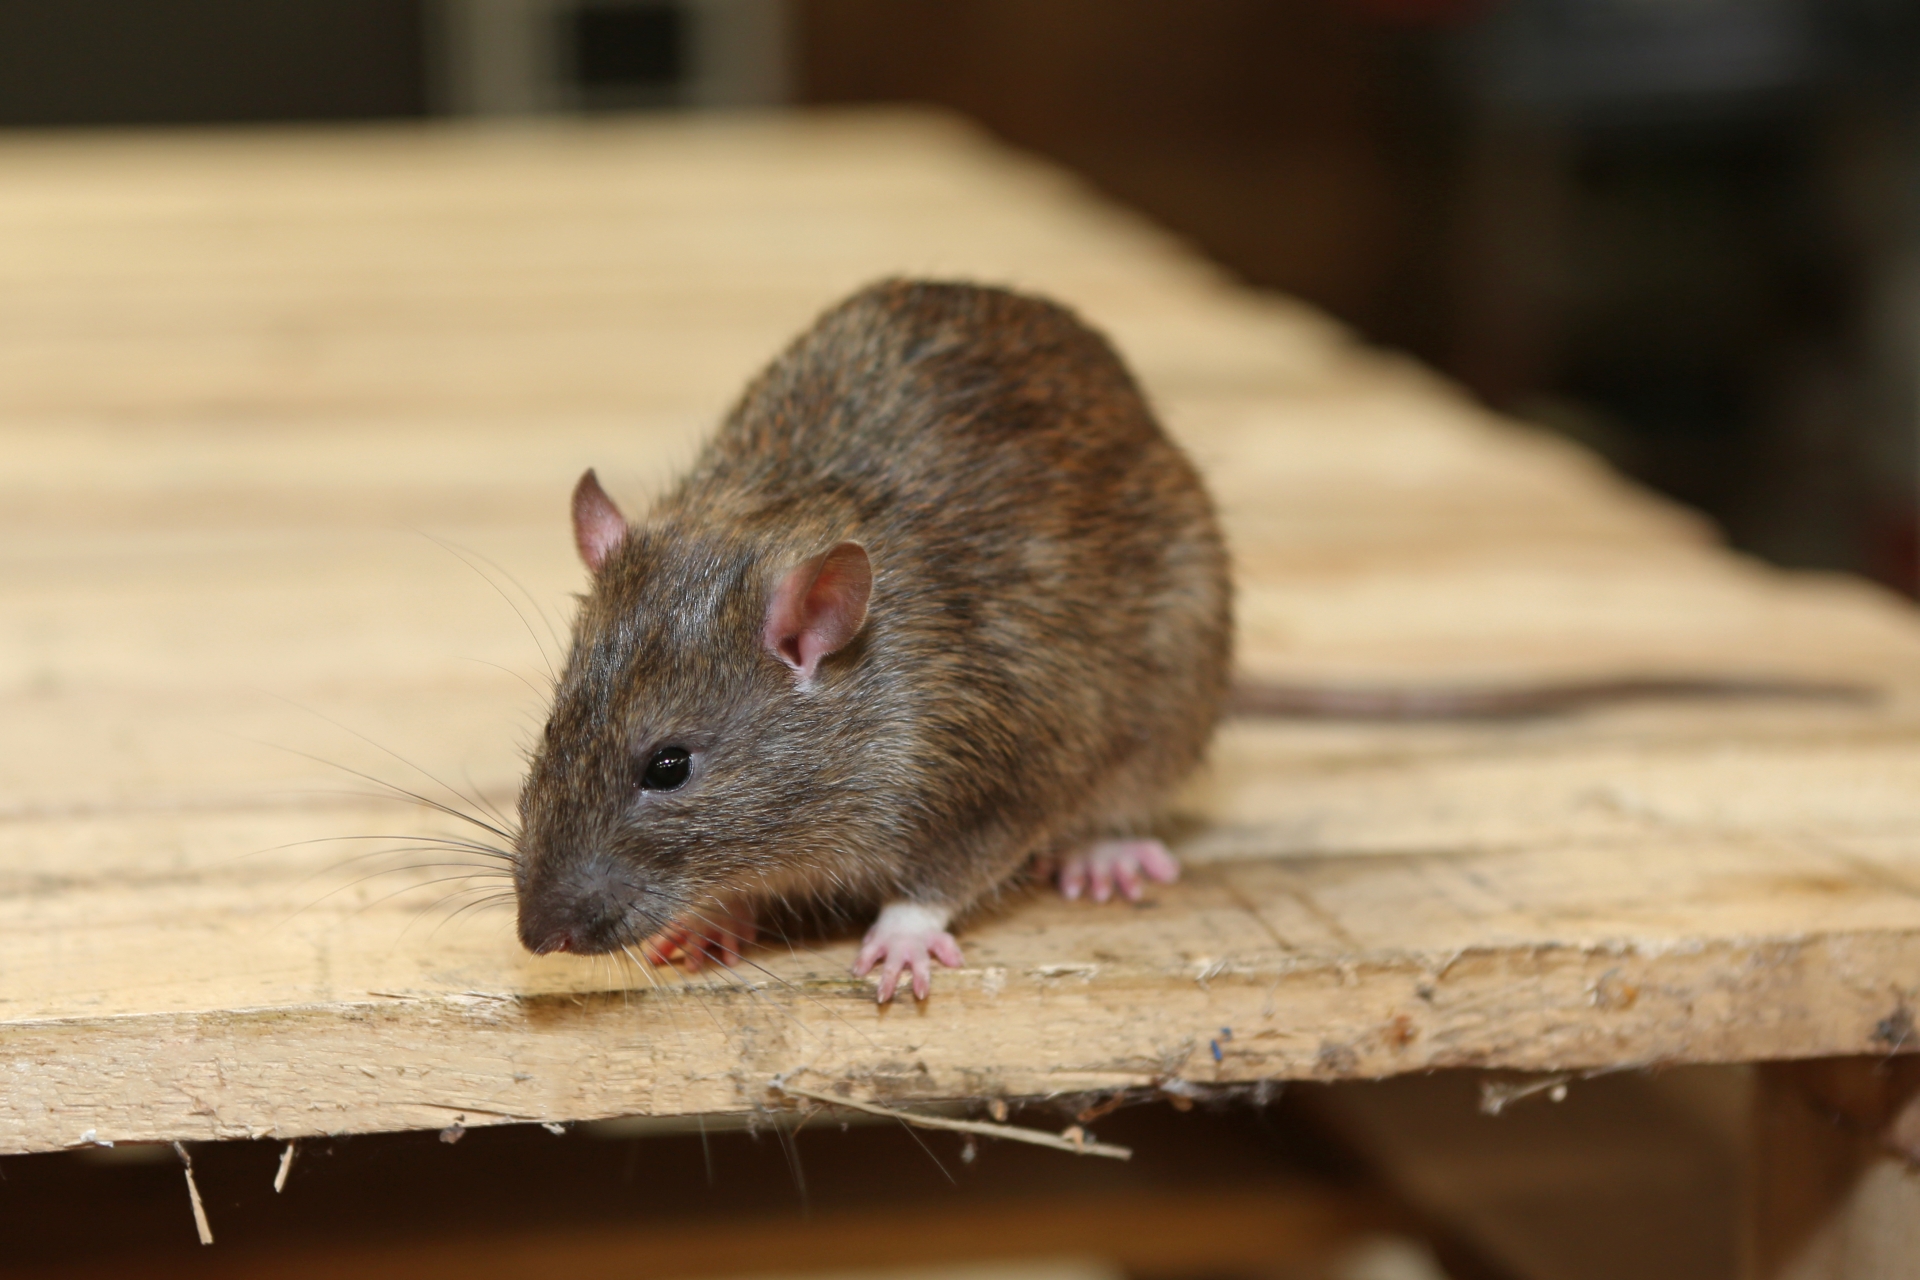 Rat extermination, Pest Control in New Cross, New Cross Gate, SE14. Call Now 020 8166 9746